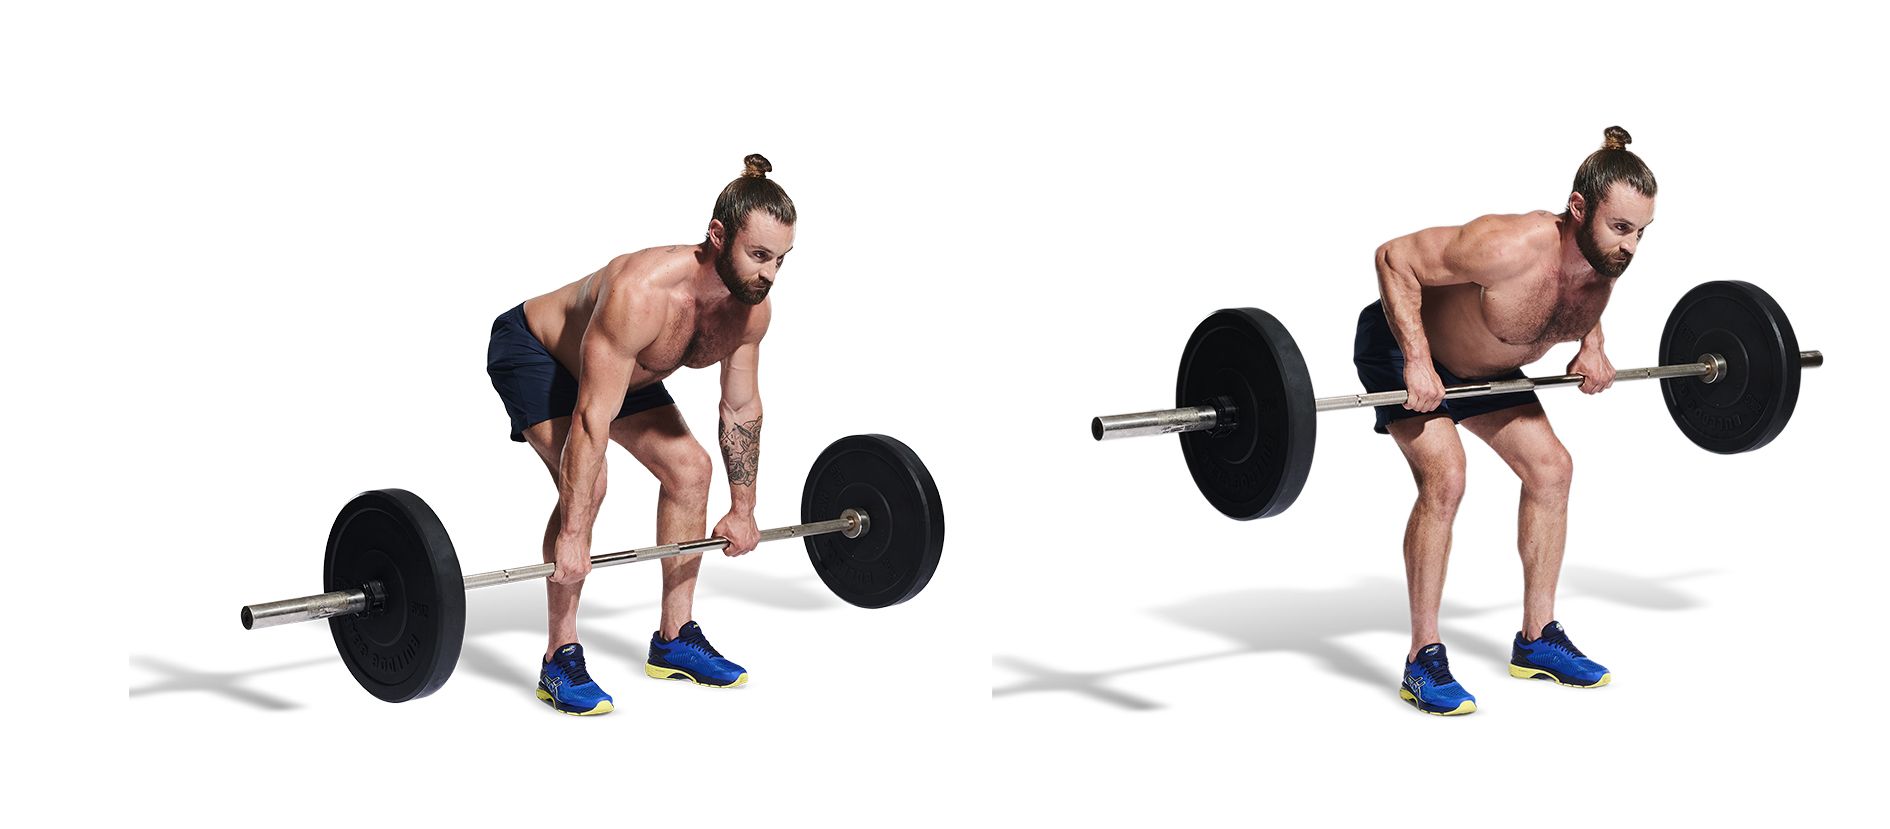 Take German Volume Training to Another Level with This Advanced Method